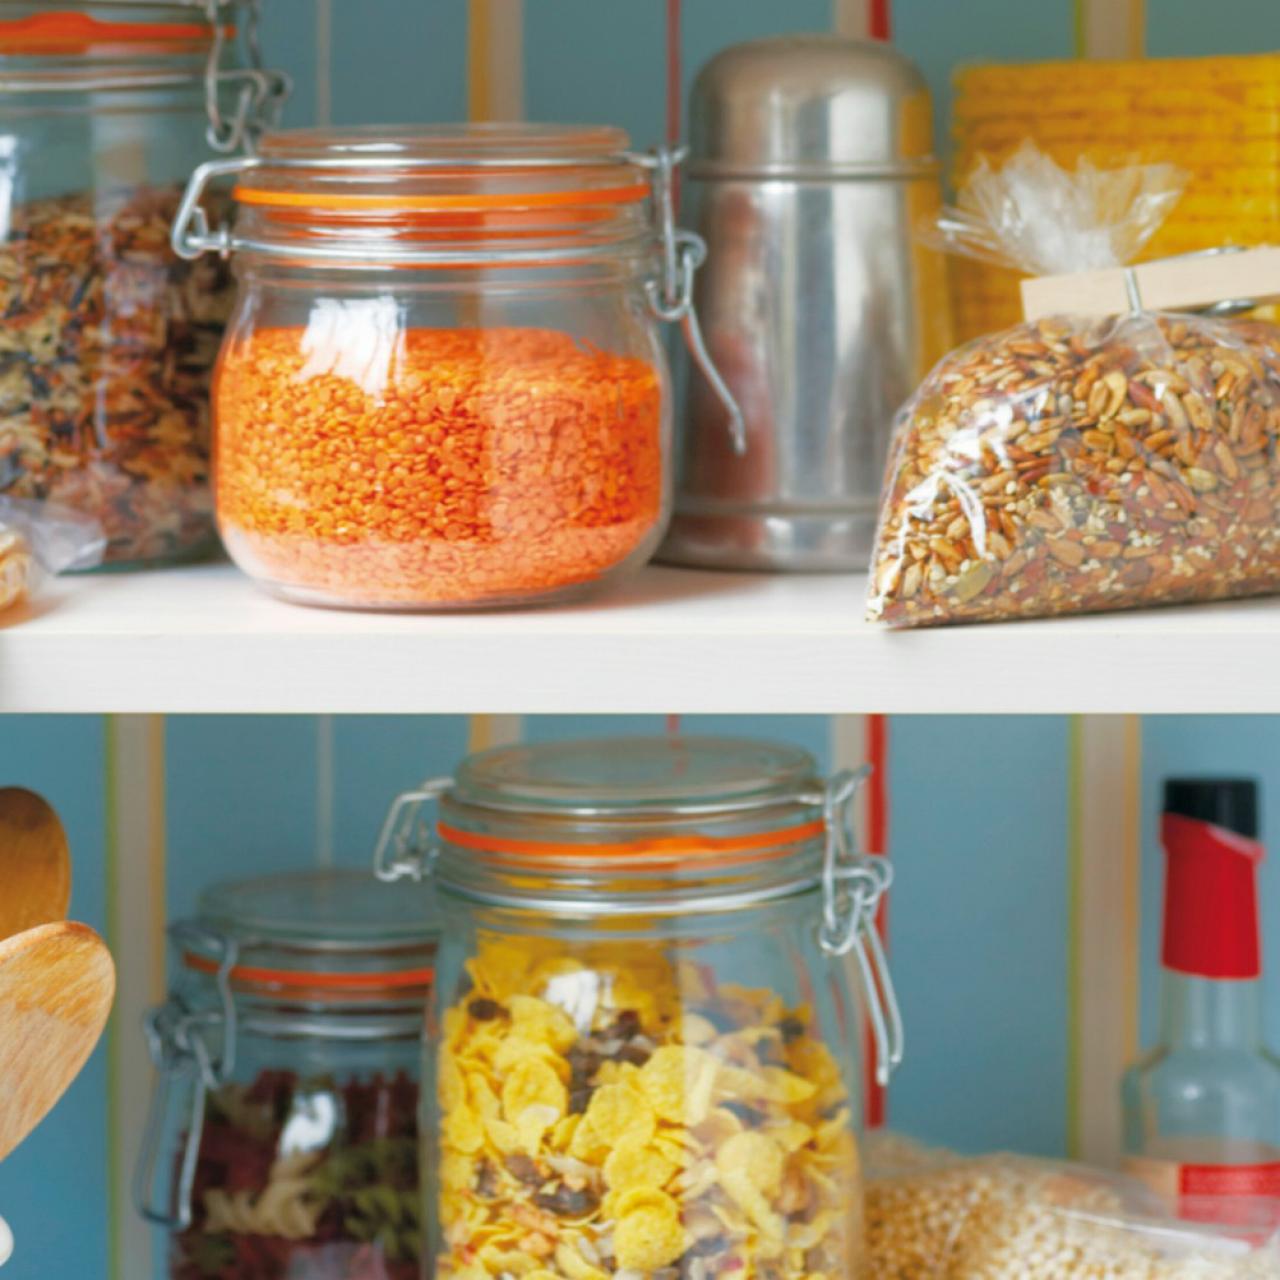 12 Ways To Organize Food Storage Containers - Organization Obsessed